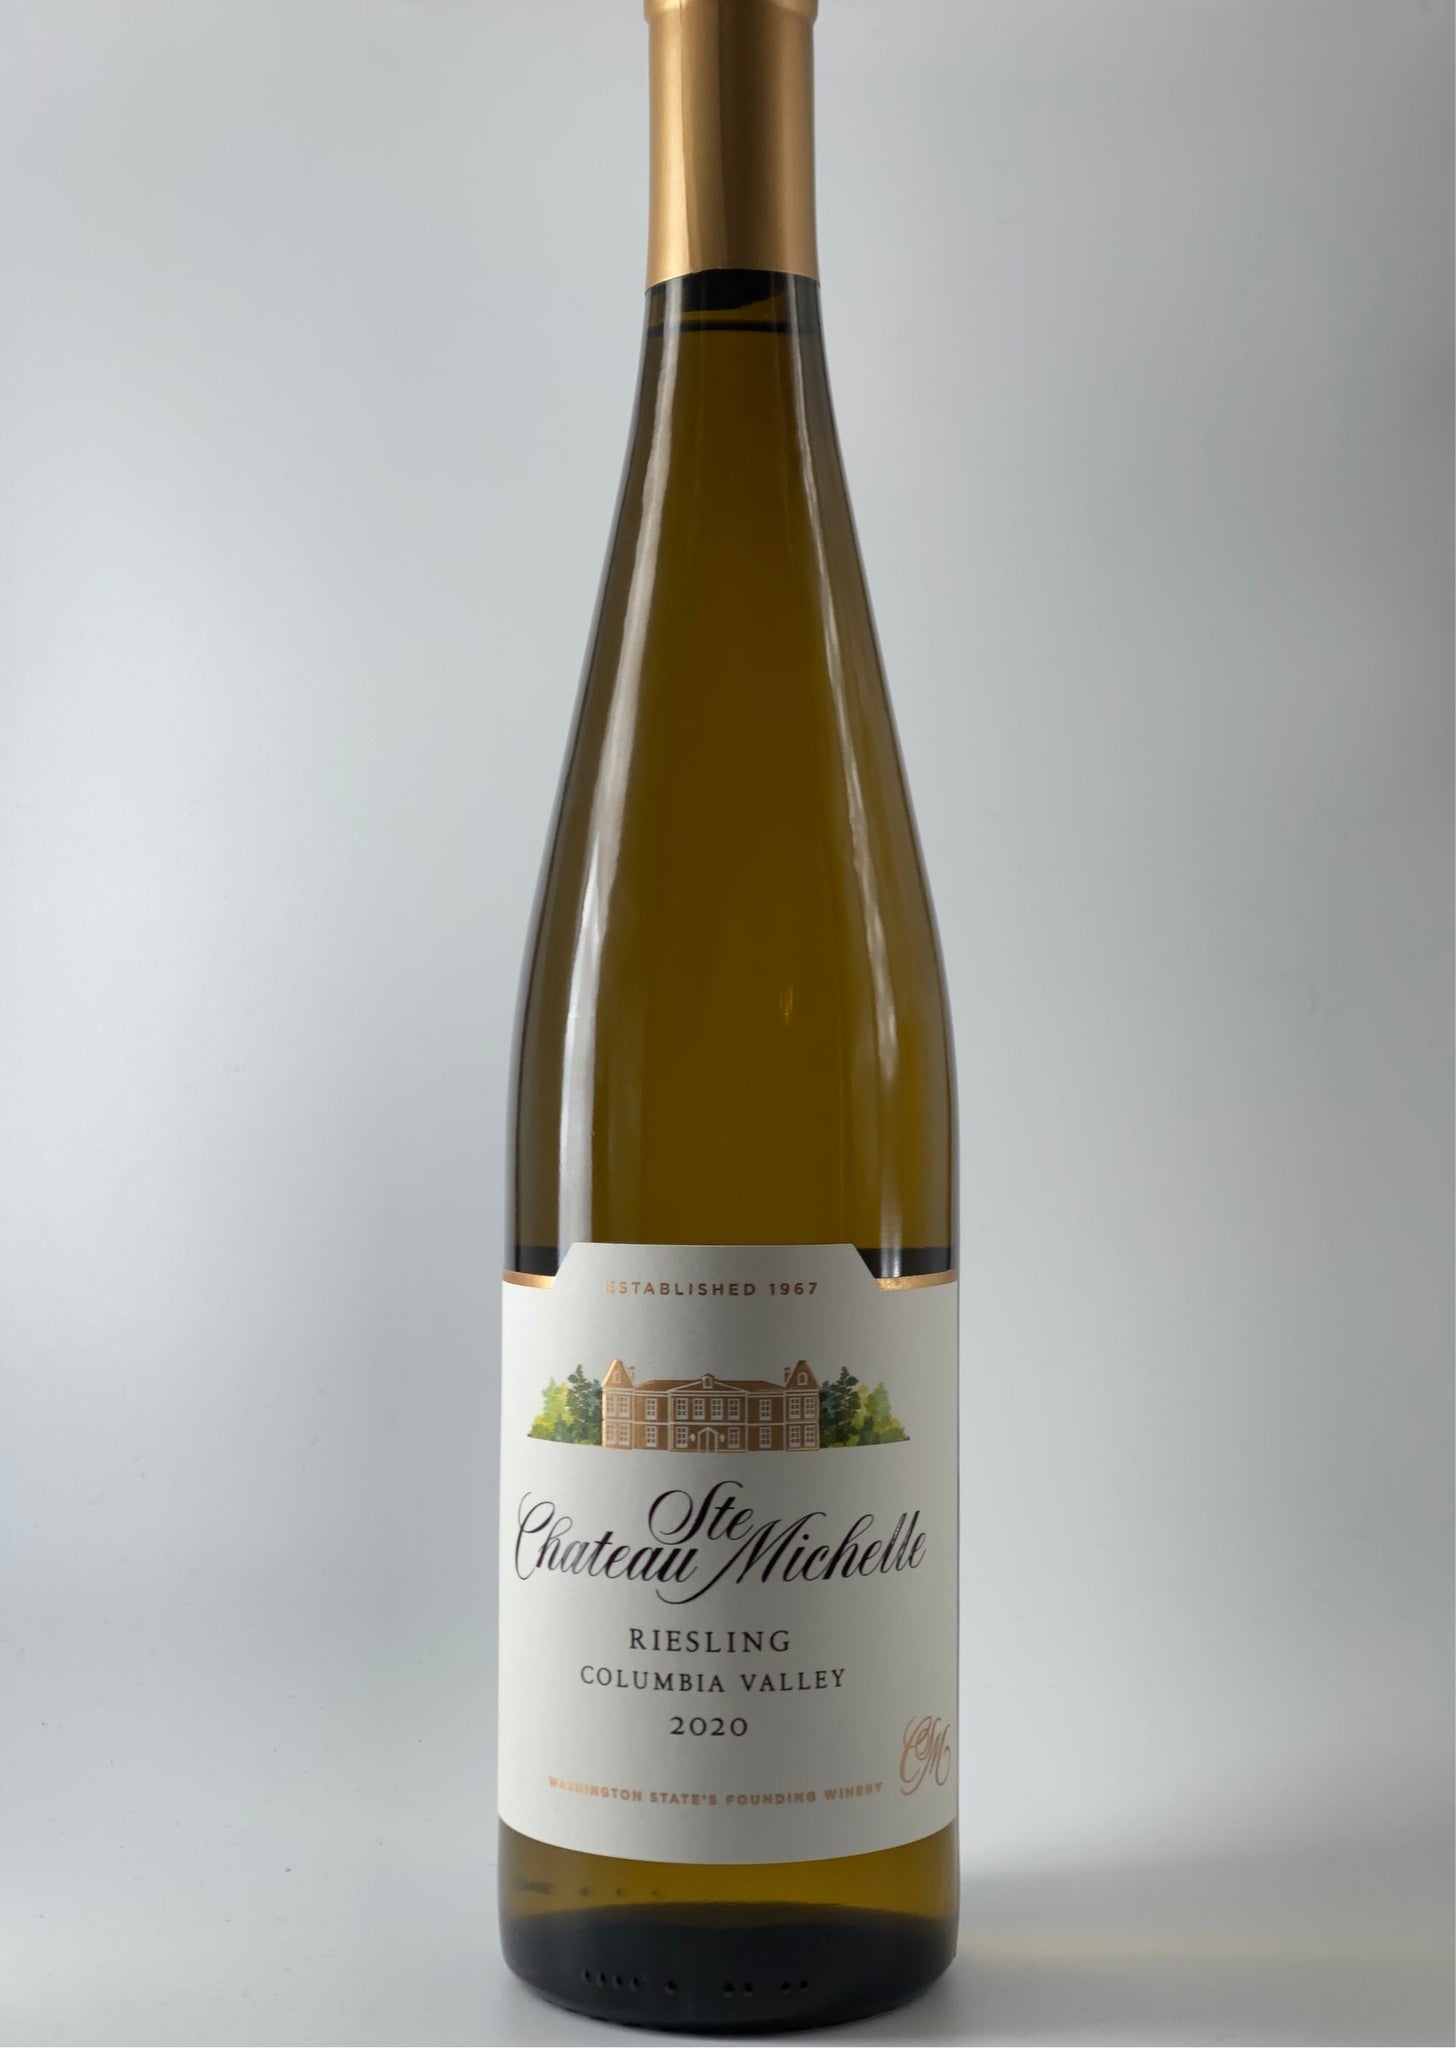 Riesling, Chateau St Michelle